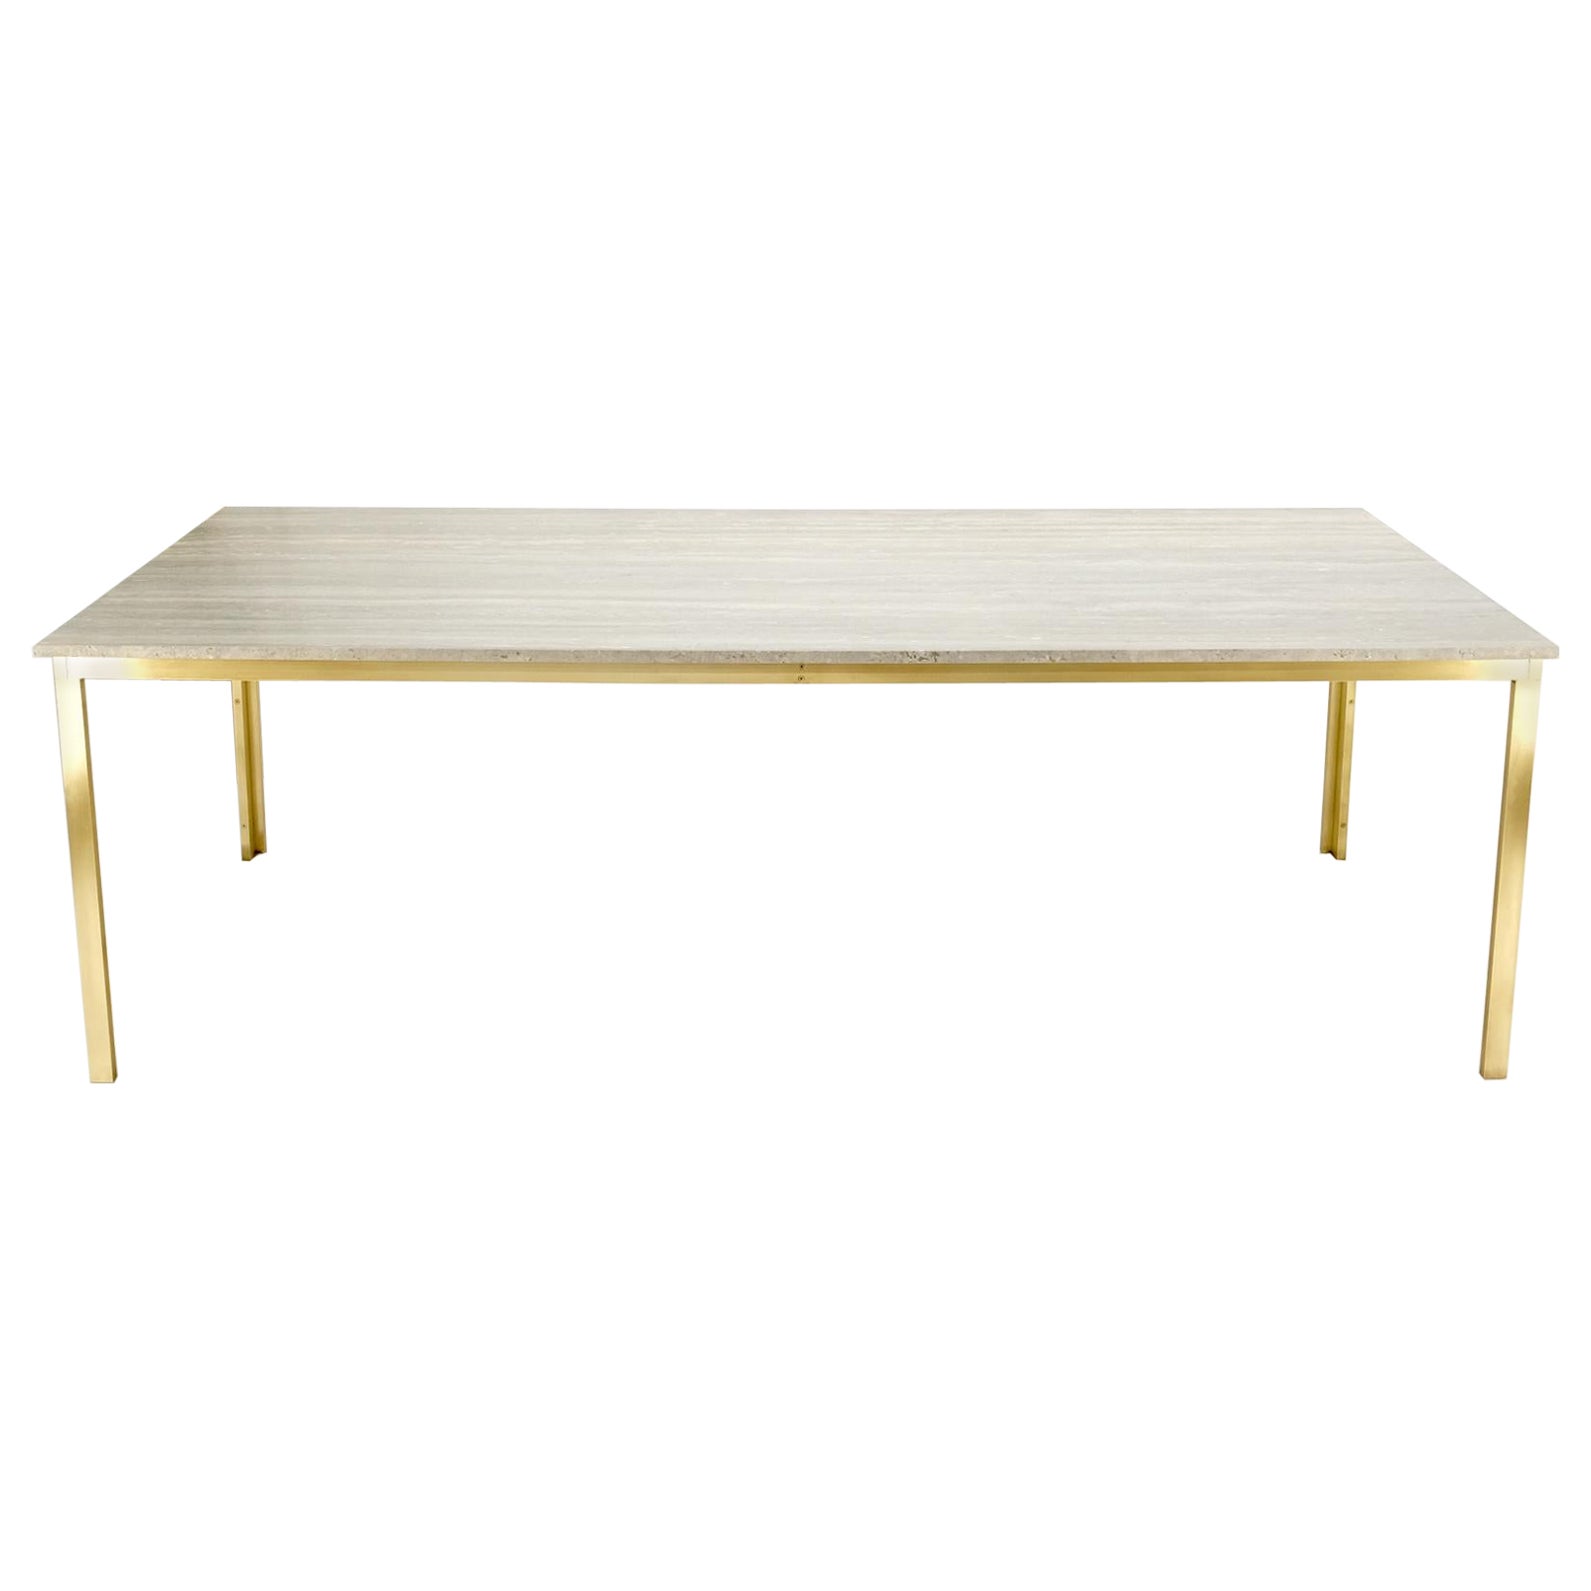 Large Heavy Solid Brass Base Travertine Top Rectangle Dining Table